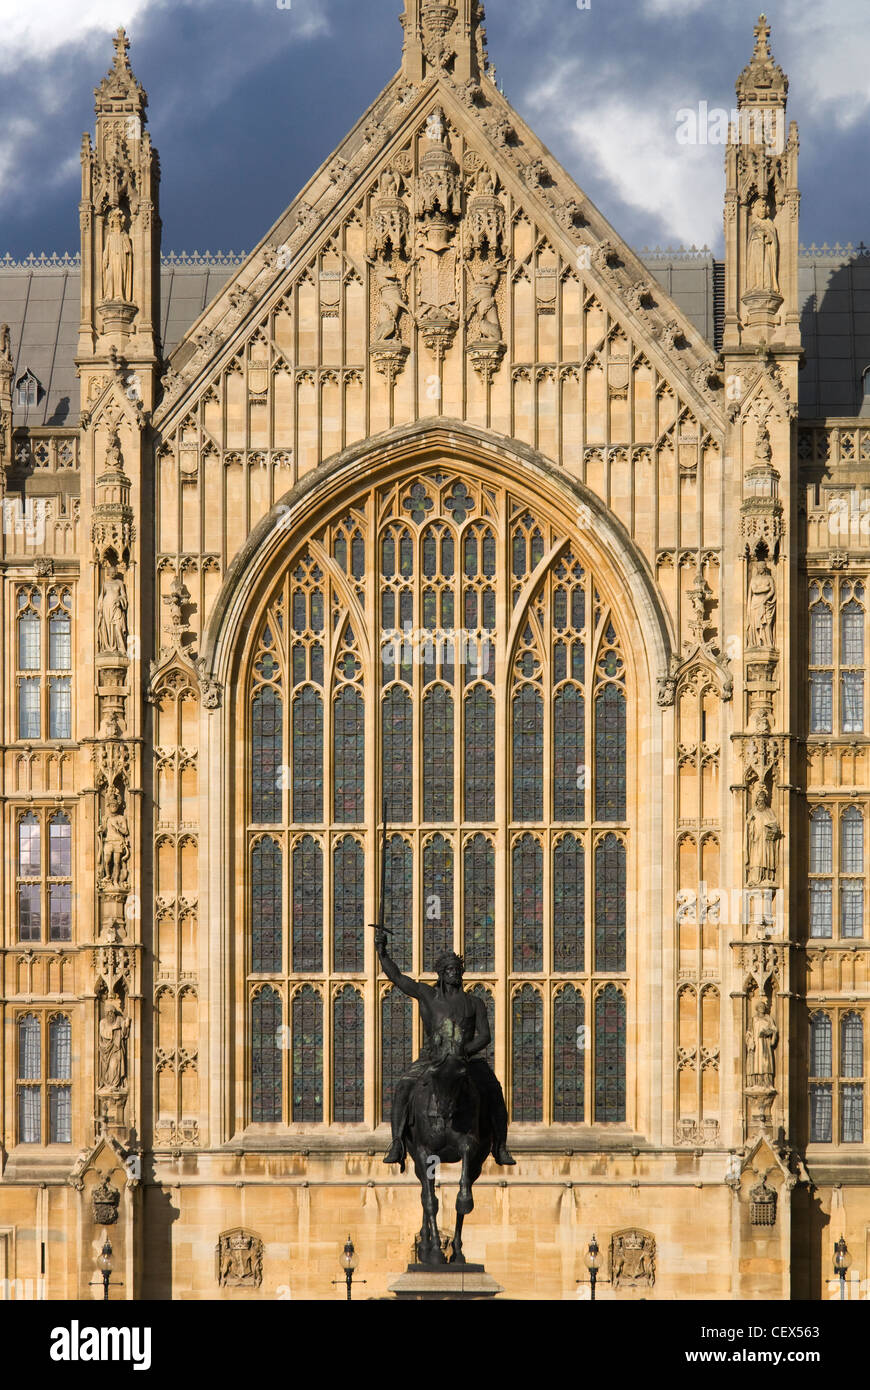 The statue of Richard the Lionheart in front of the Palace of Westminster 2. Stock Photo